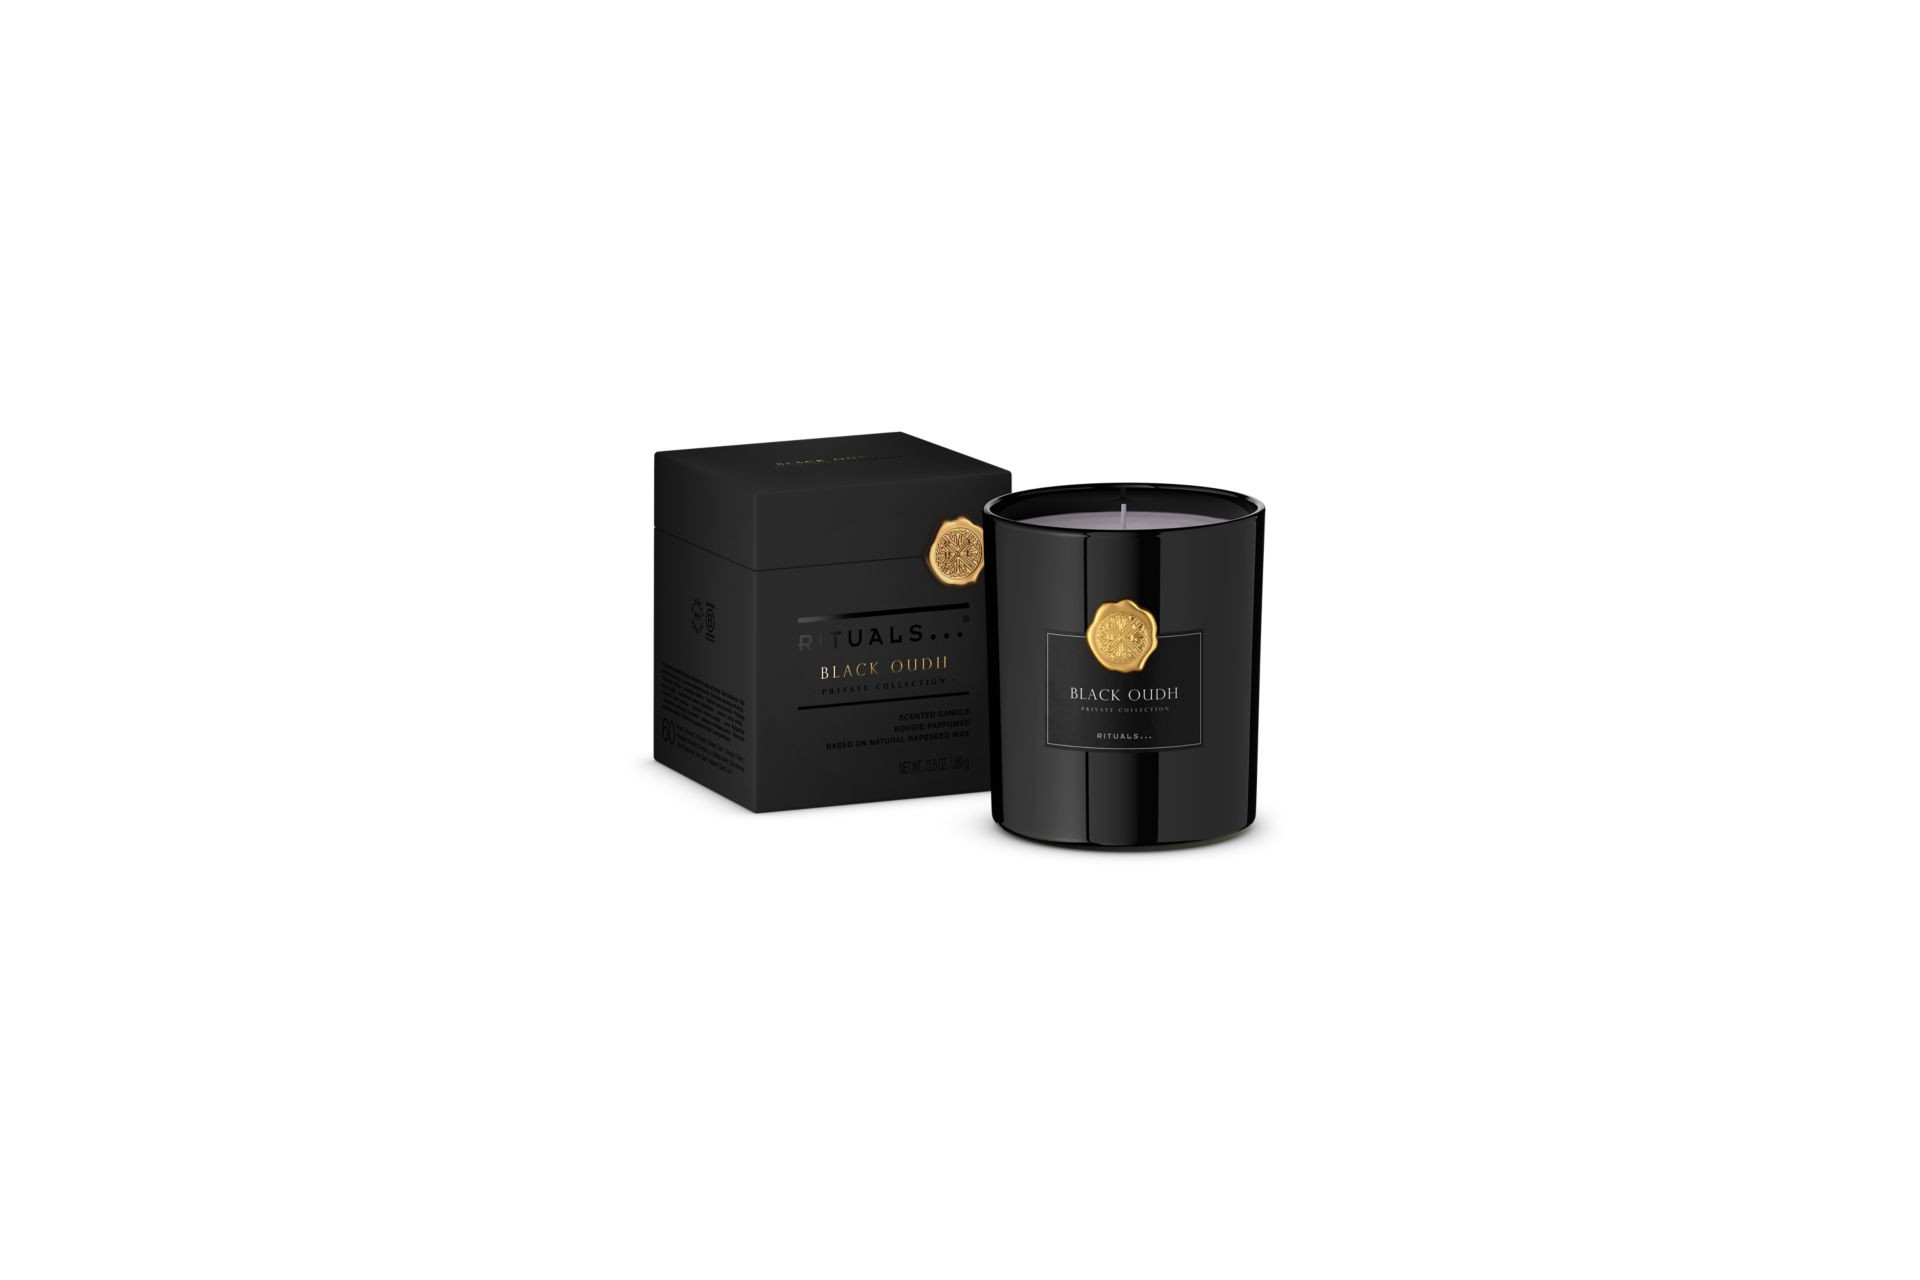 Acheter Rituals Black Oudh Scented Candle